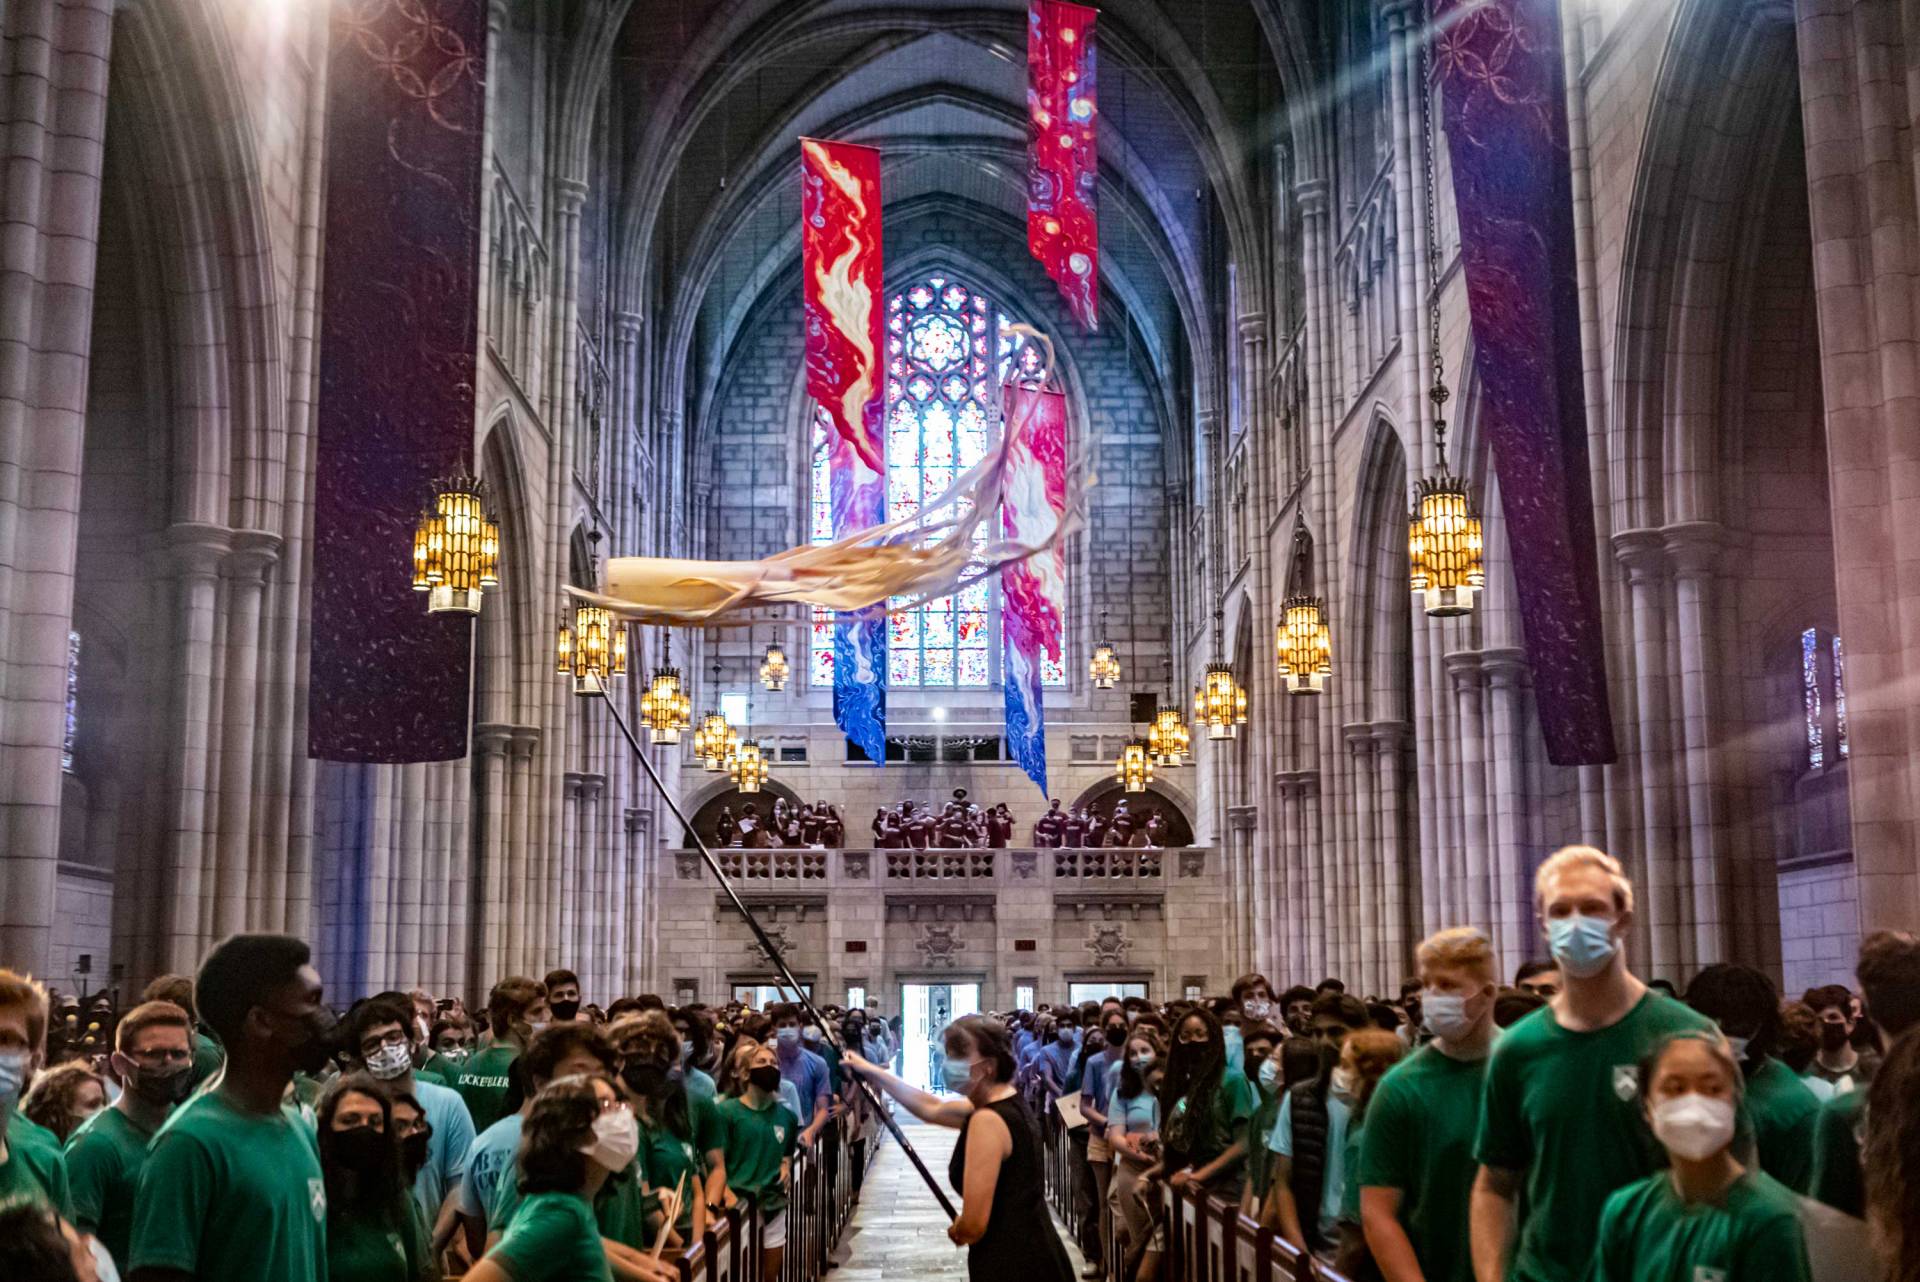 Students watch as the kite flyers walk up the chapel aisle